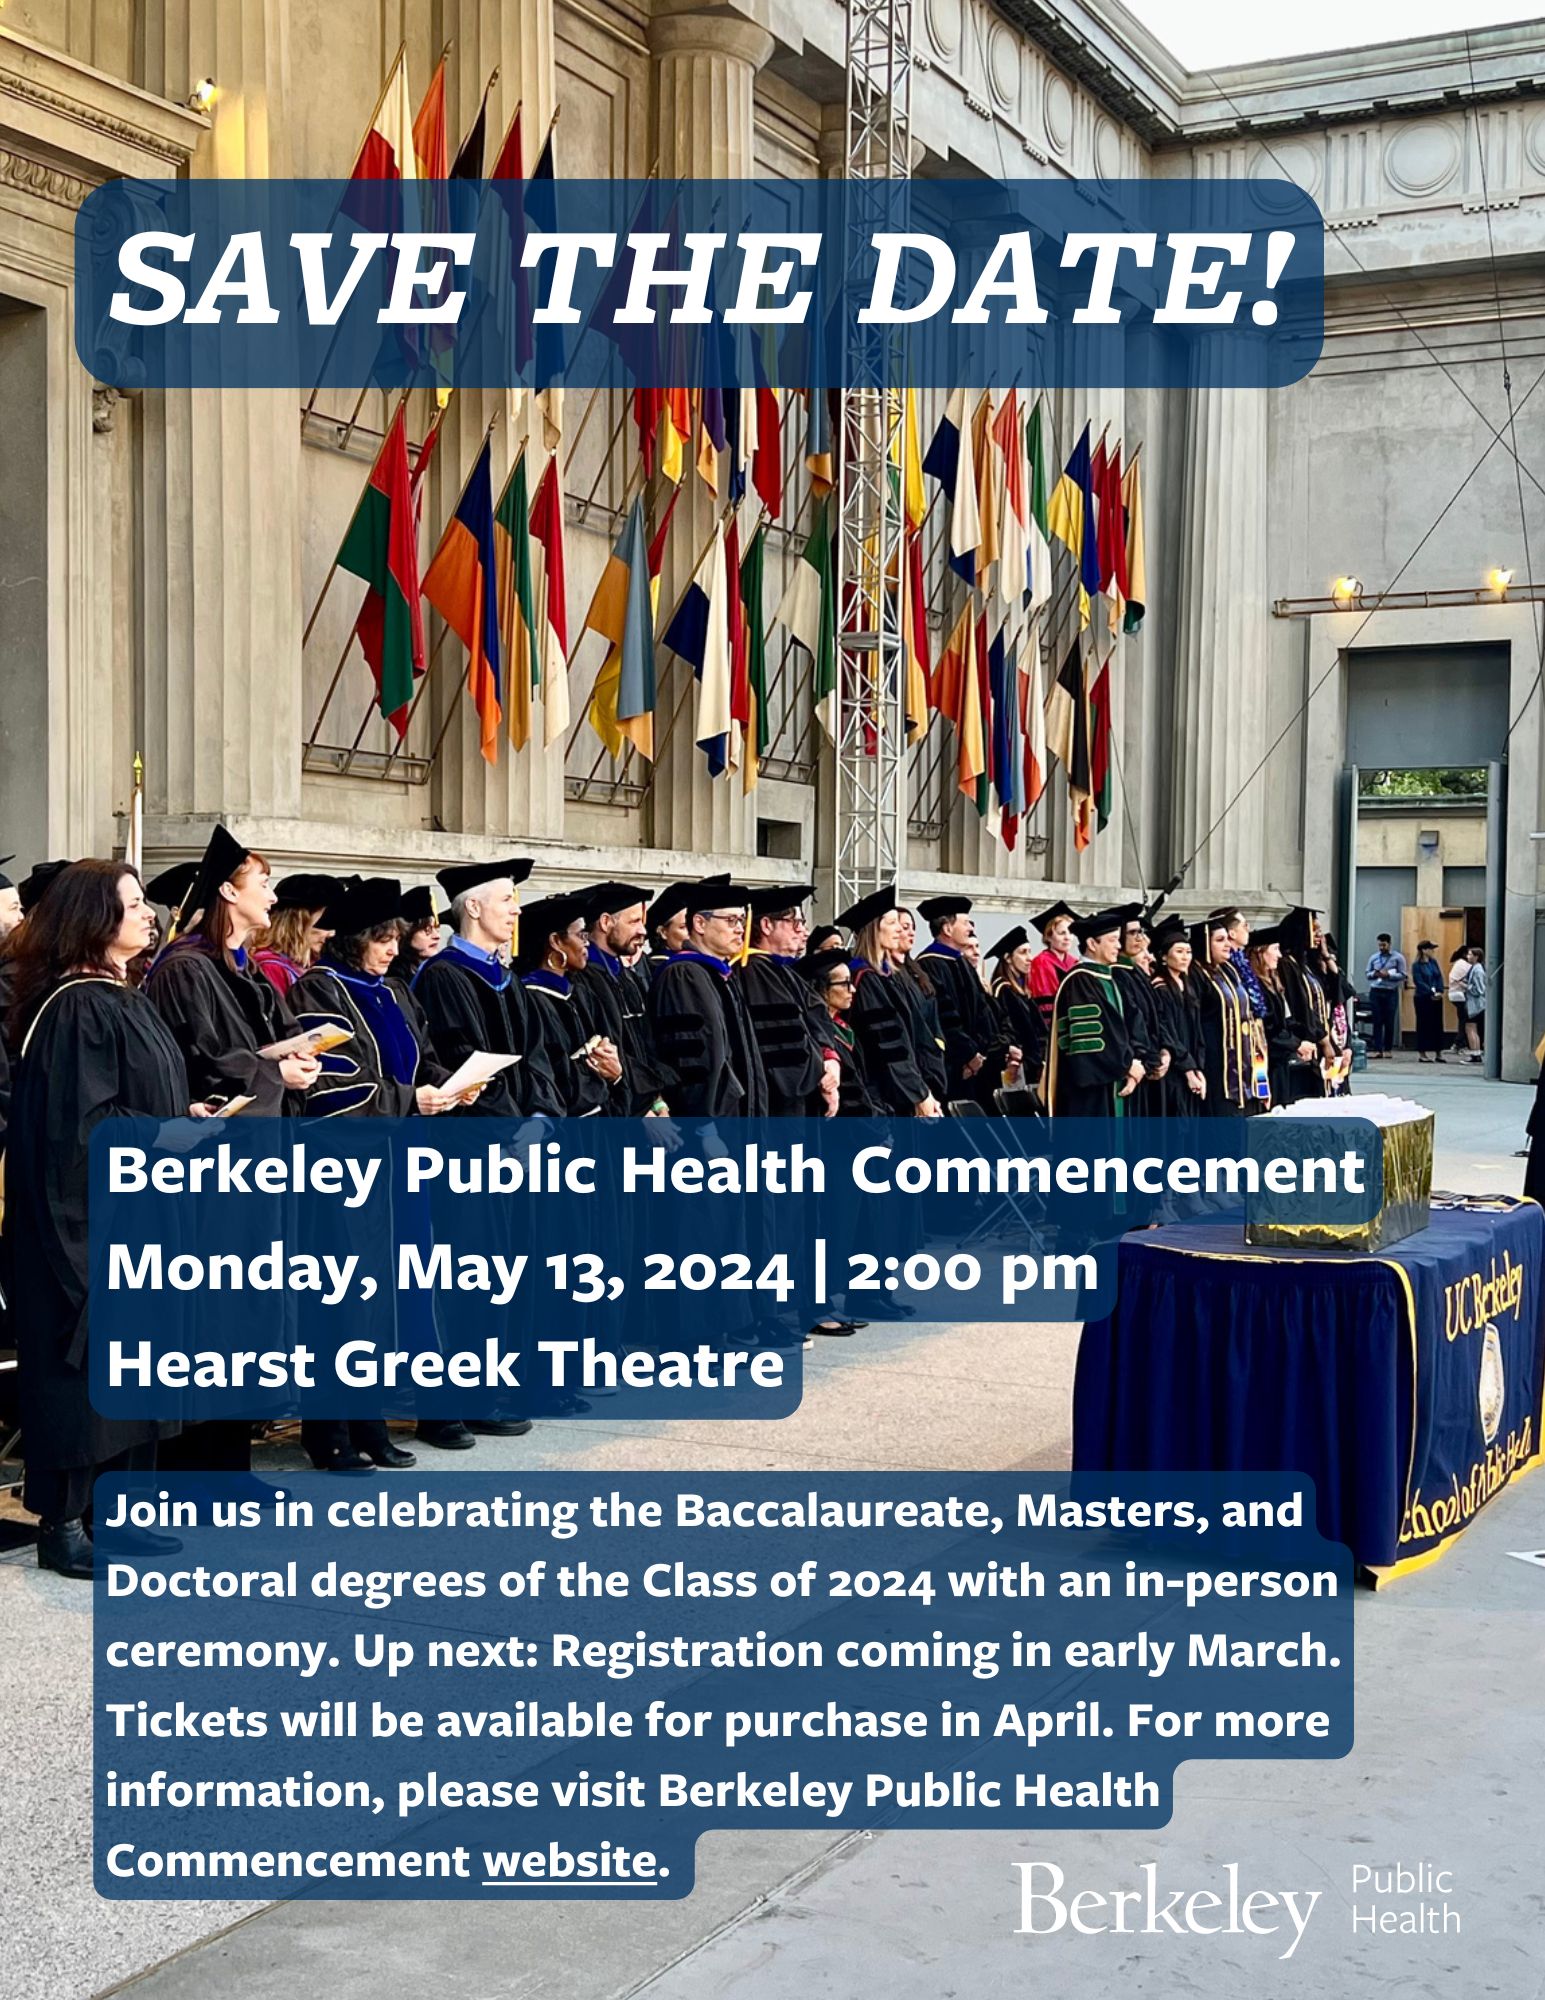 Save the date! Up next: Registration coming in early March. Tickets will be available for purchase in April.